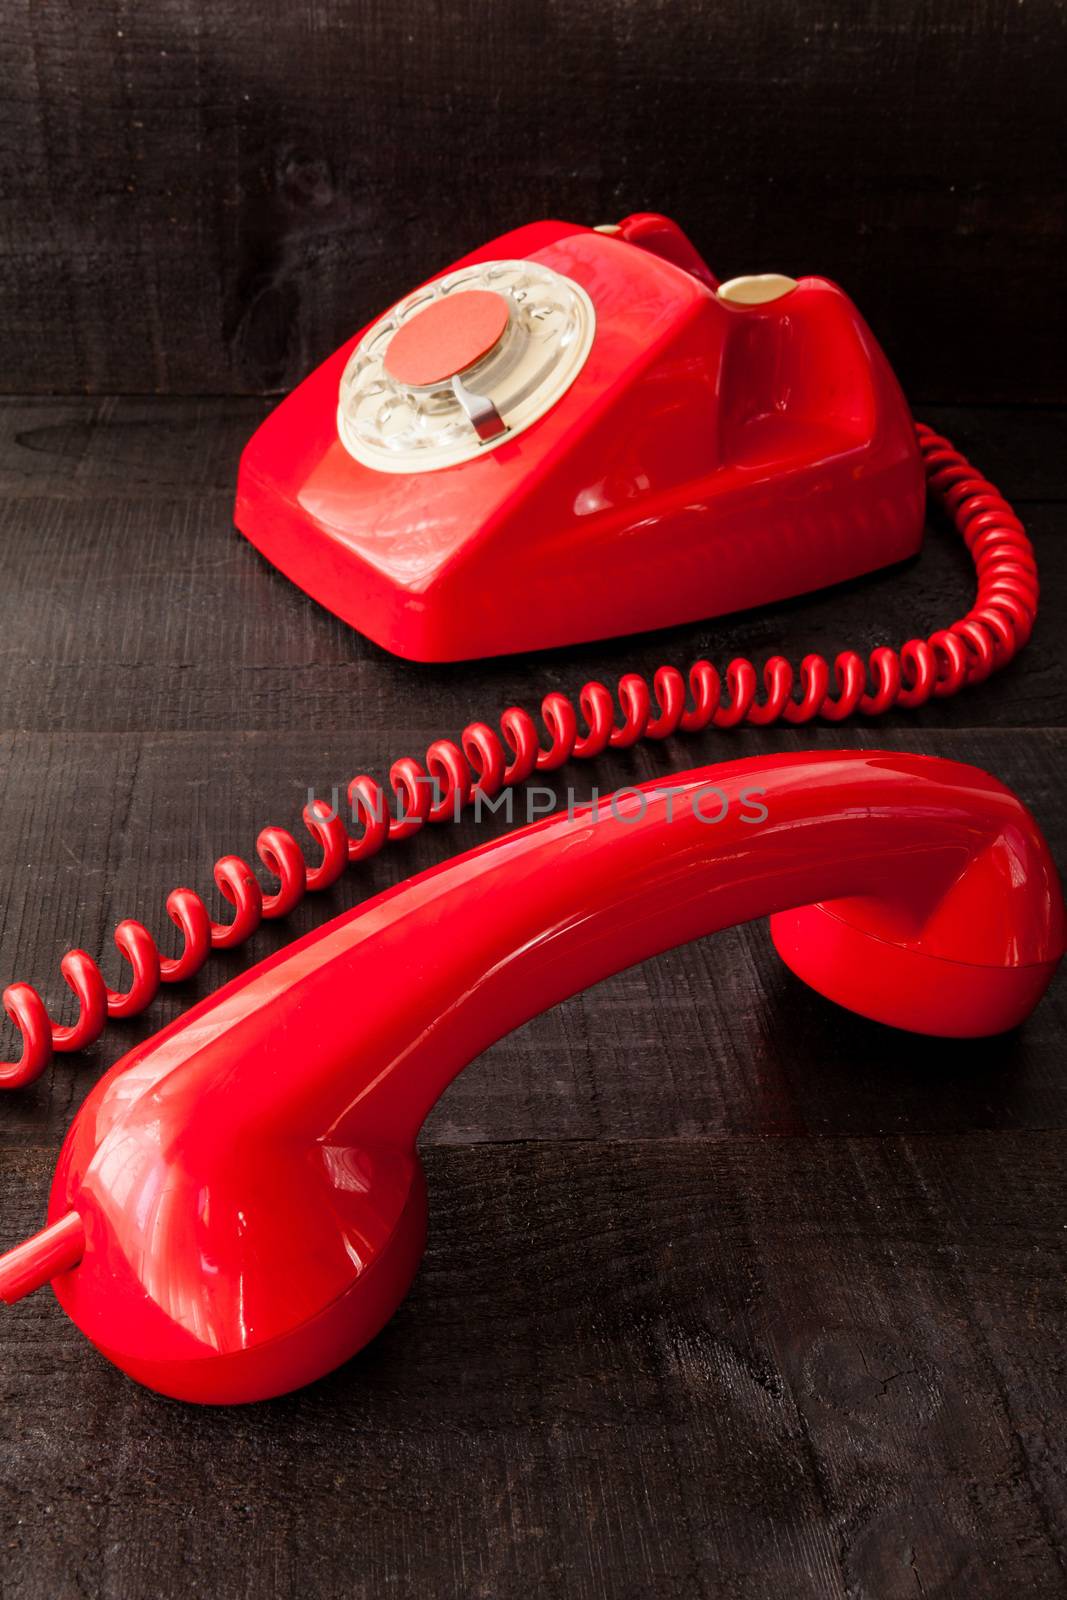 The red retro telephone by andongob